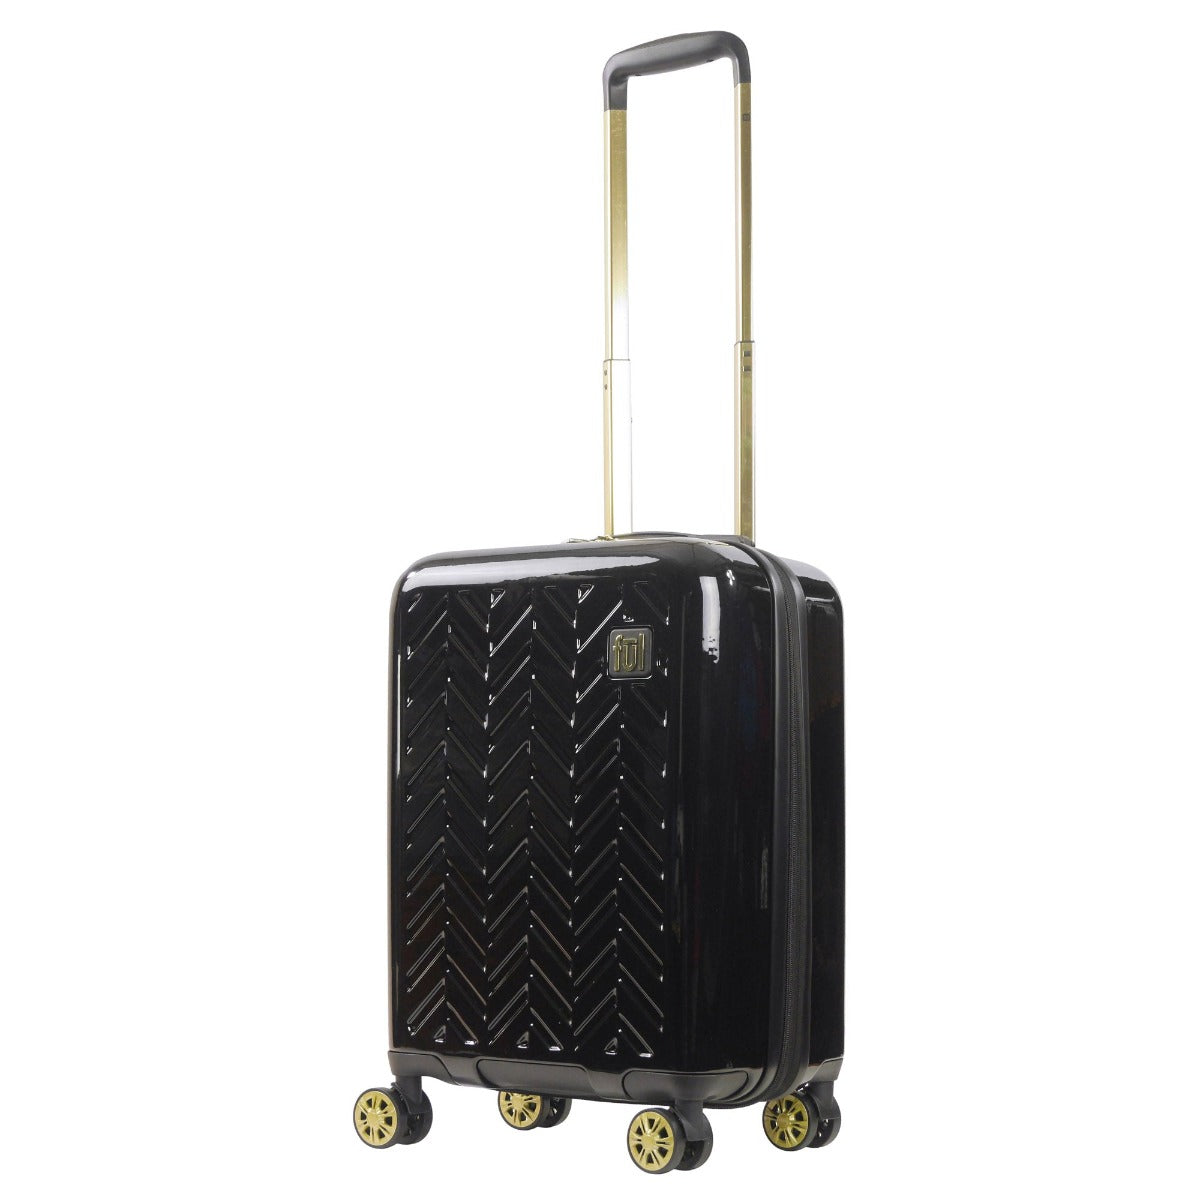 Ful Groove 22 inch carry-on hardside degree spinner suitcase Black luggage gold details